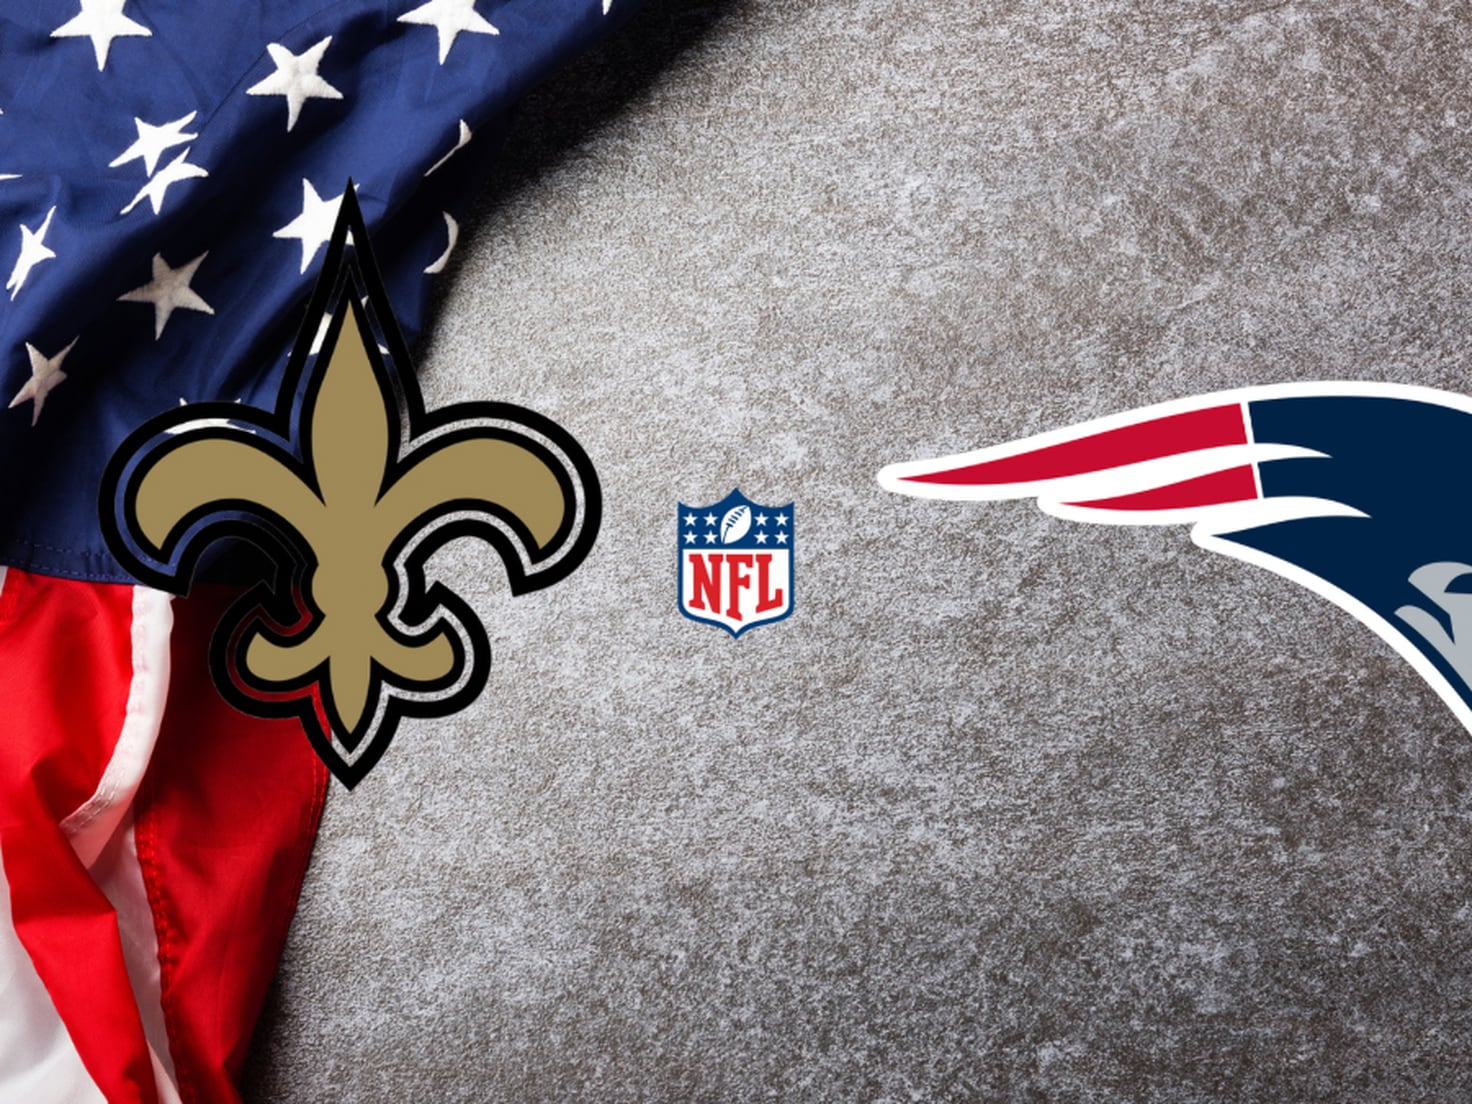 New Orleans Saints vs New England Patriots: times, how to watch on TV,  stream online